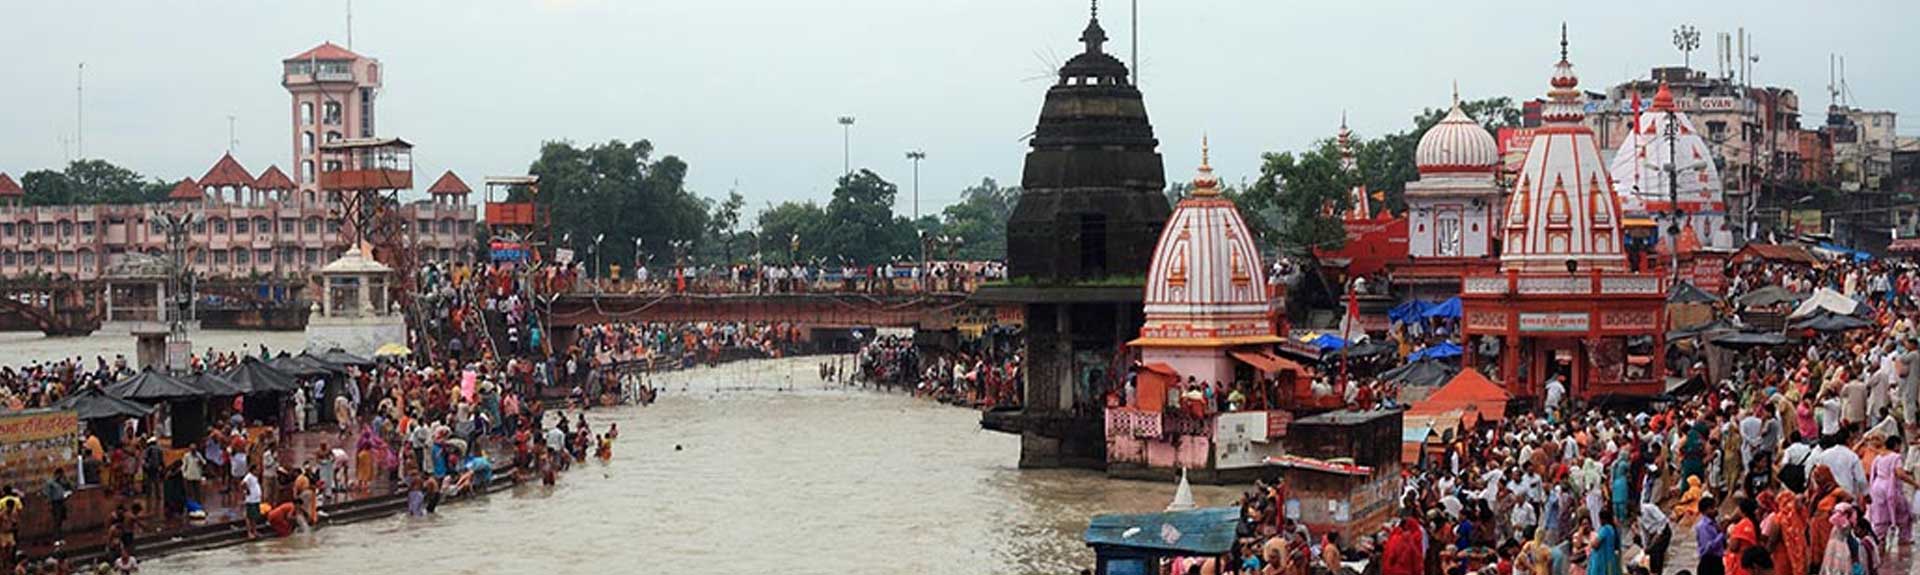 Char Dham Yatra package from Haridwar by car